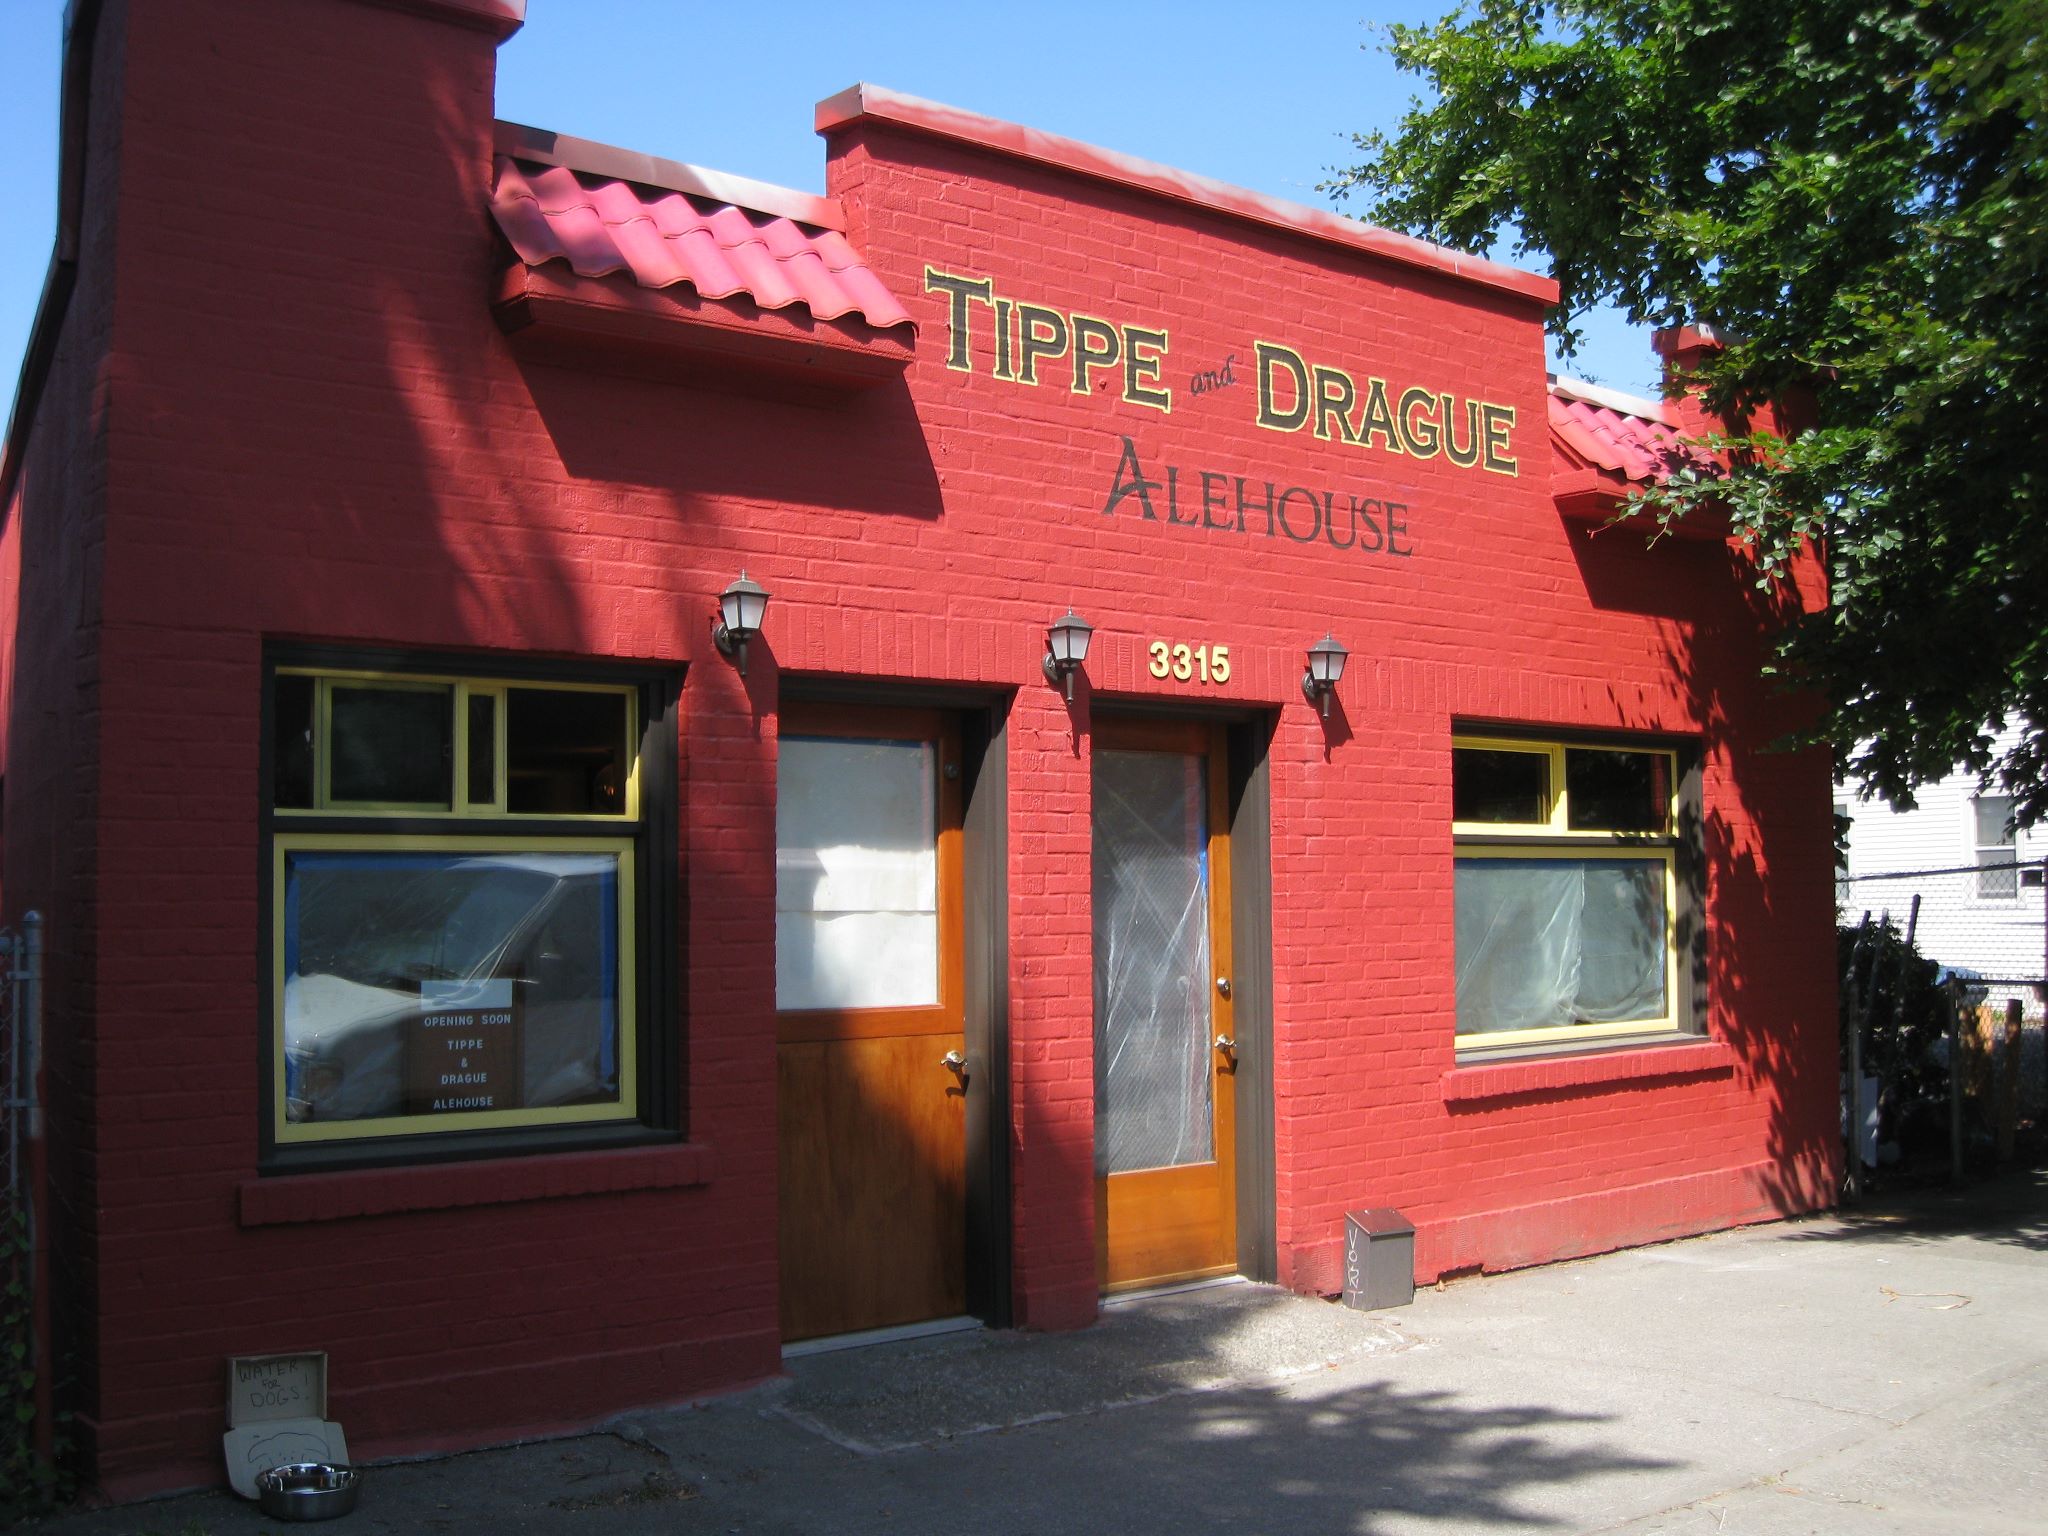 Company logo of Tippe and Drague Alehouse